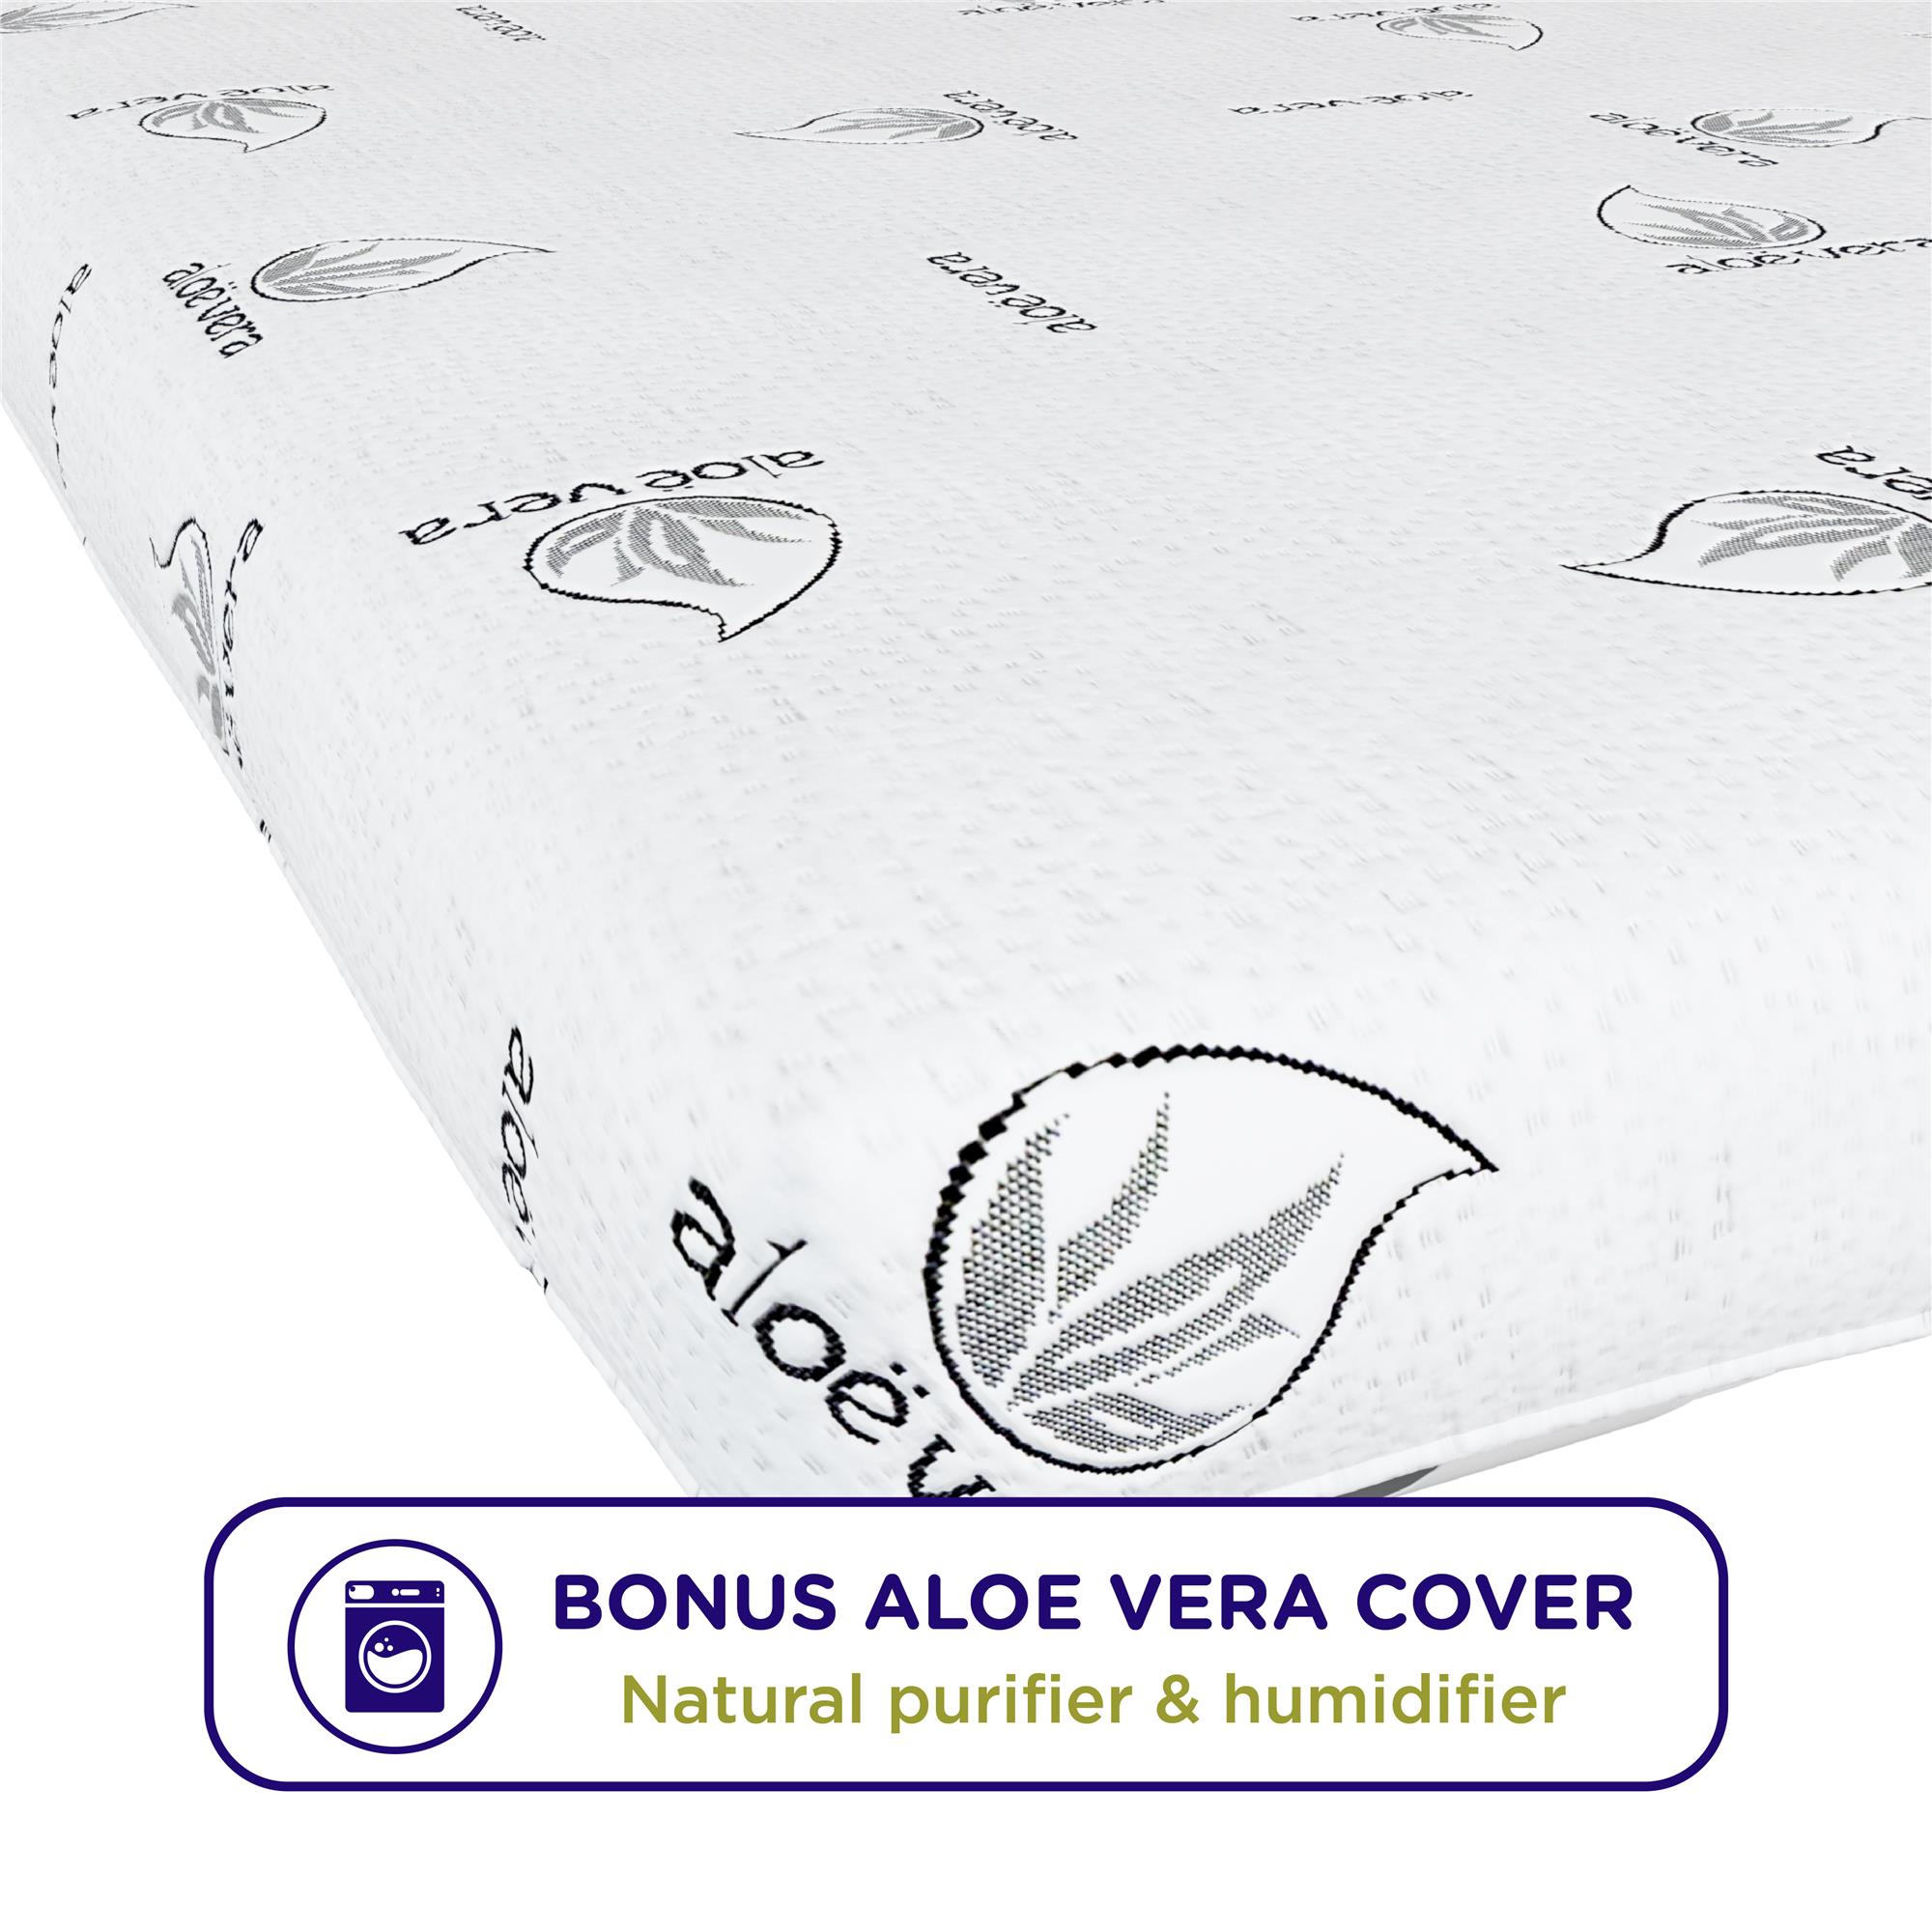 Signature Sleep Honest Elements 7 Natural Wool Mattress with Organic Cotton and Micro Coils, Full Size, [bed_full] - image 5 of 23